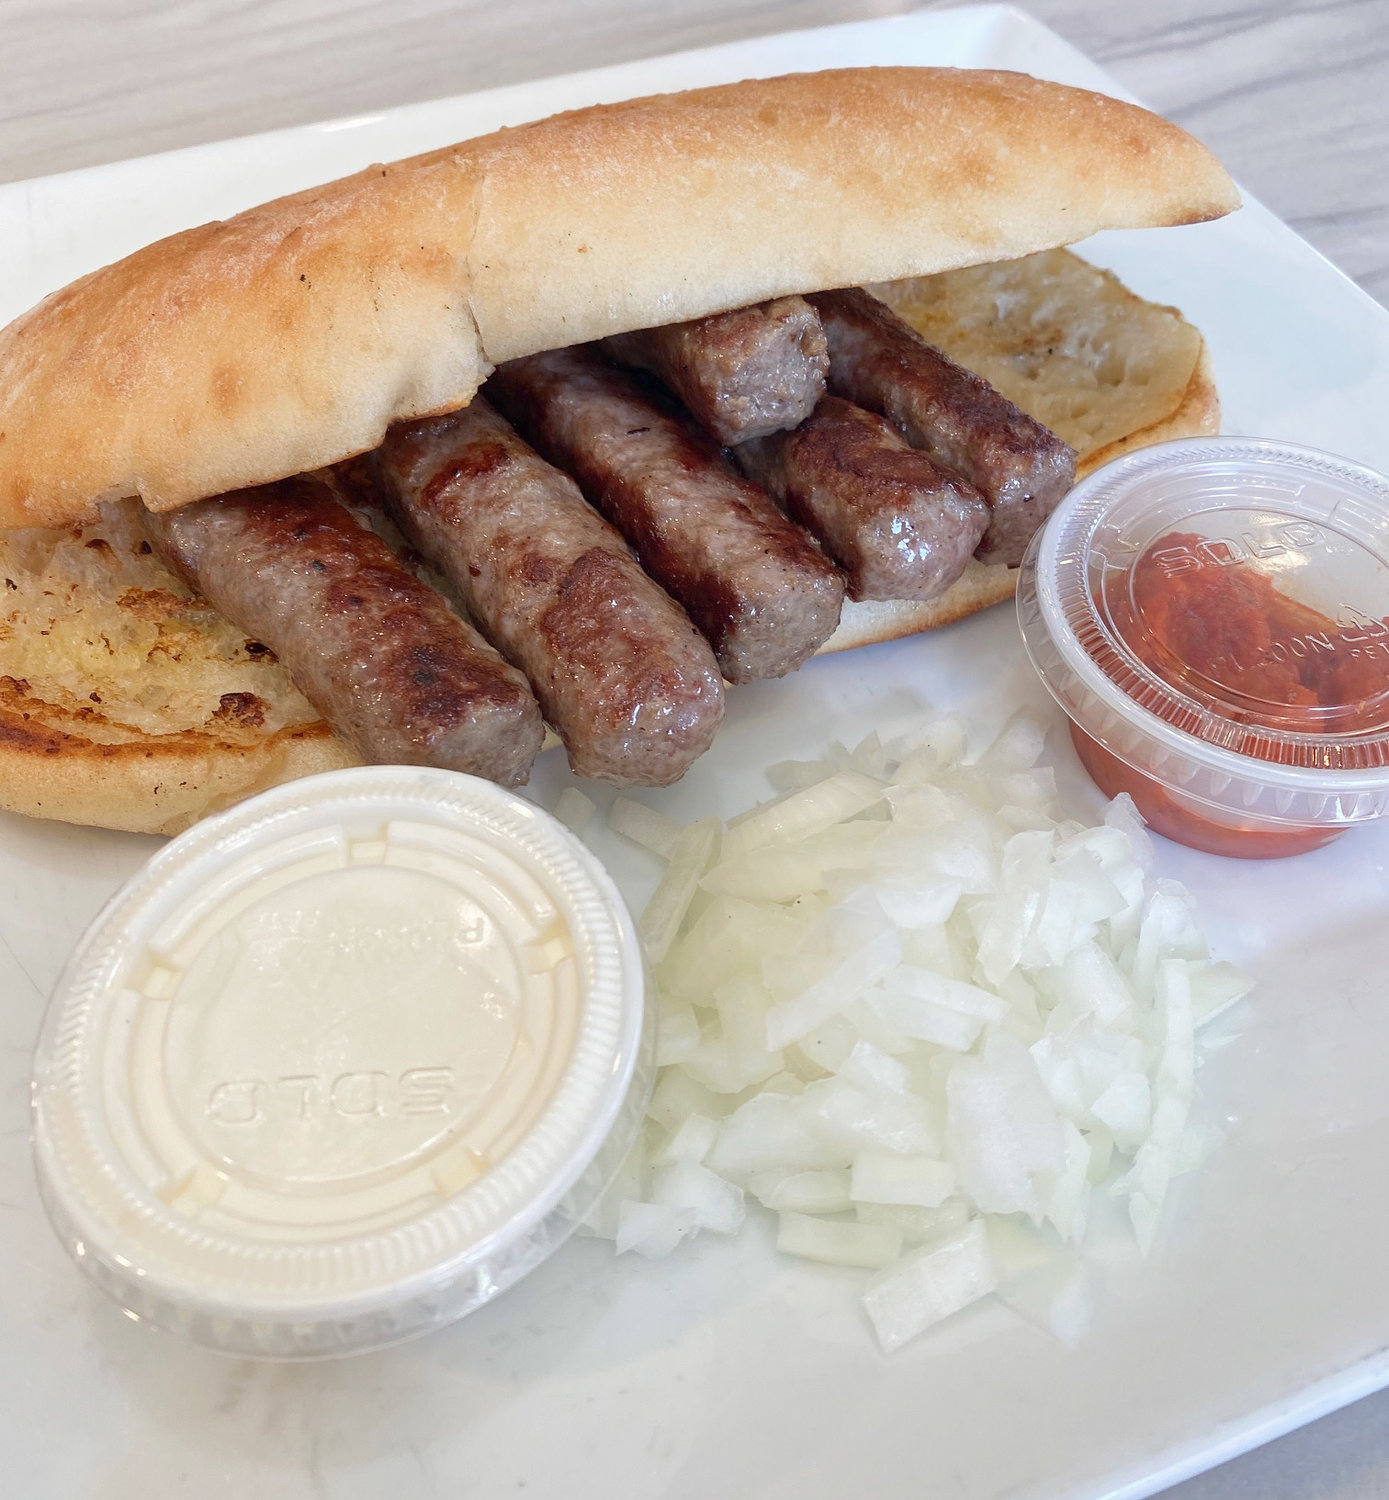 Cevapi is one of the items that will be available from Balkan Street Food of Utica at the New York State Fair.